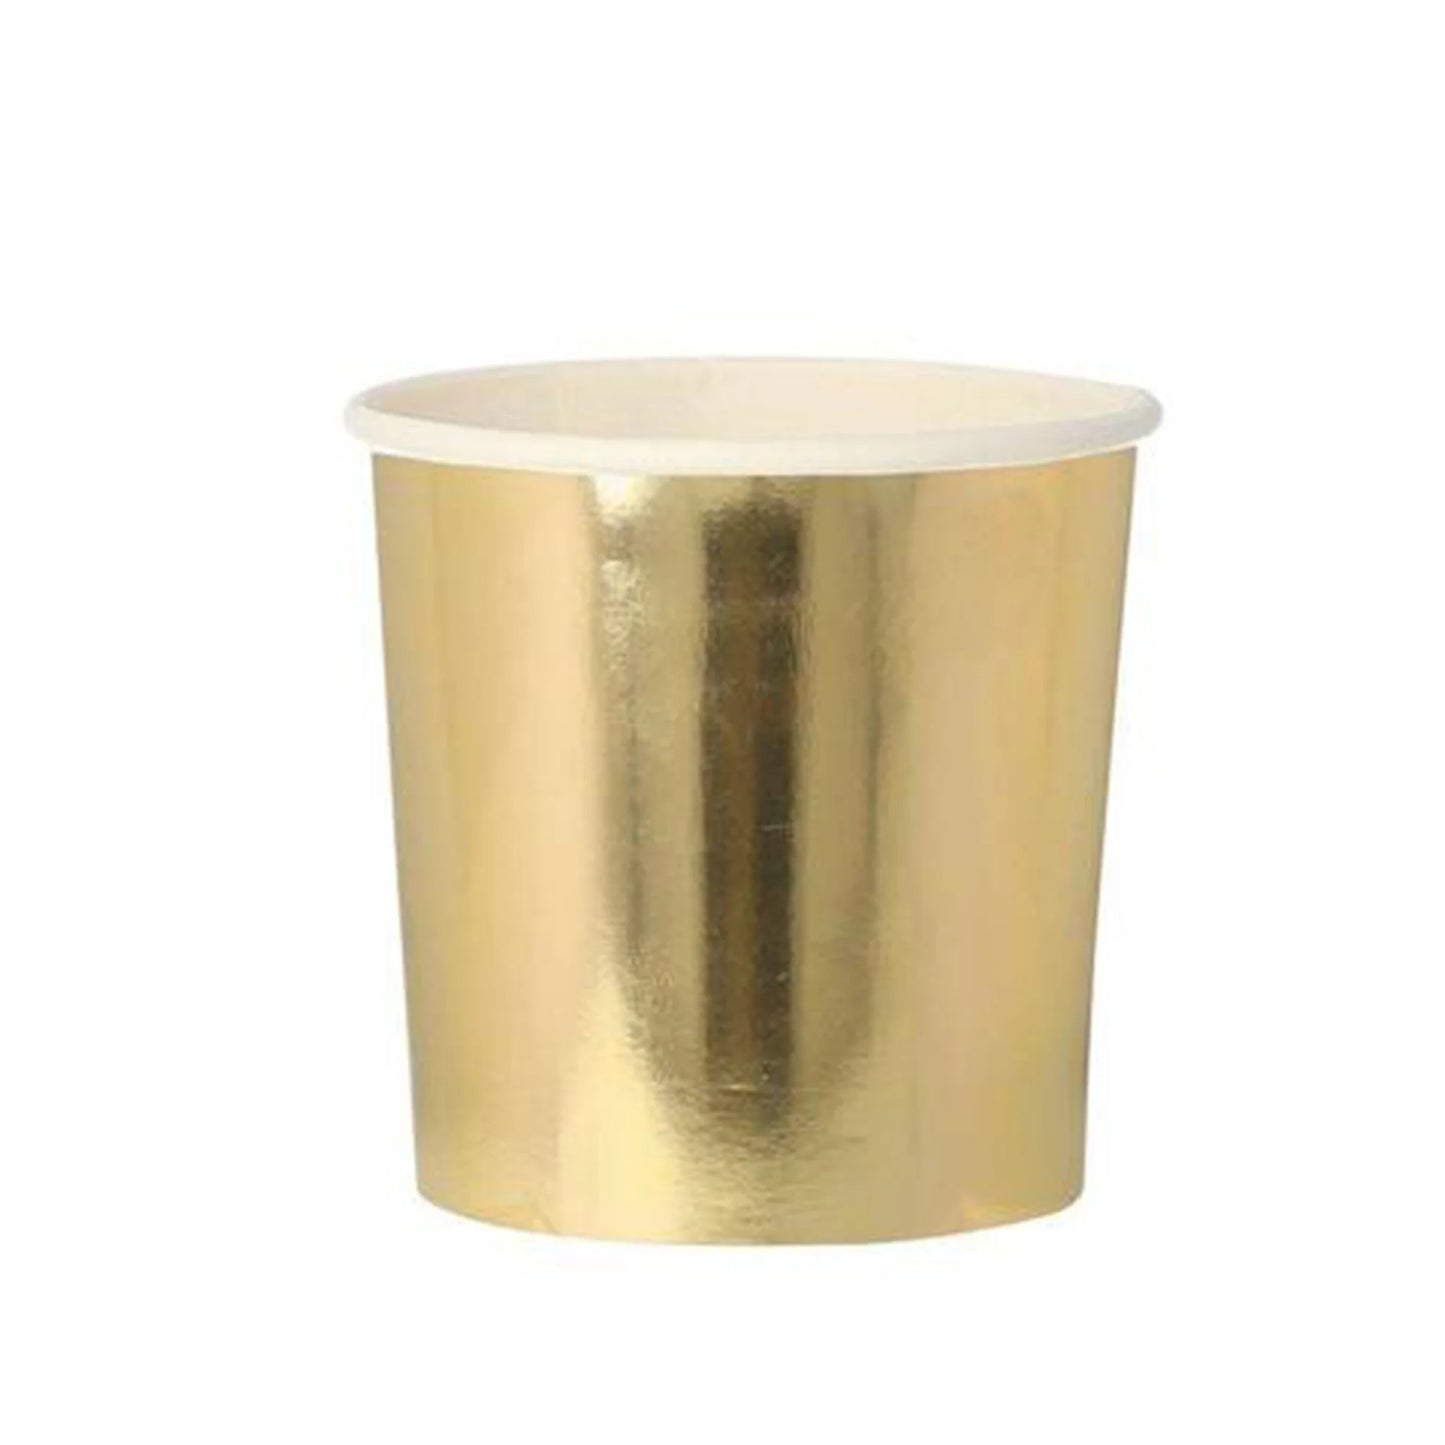 SMALL GOLD TUMBLER CUP